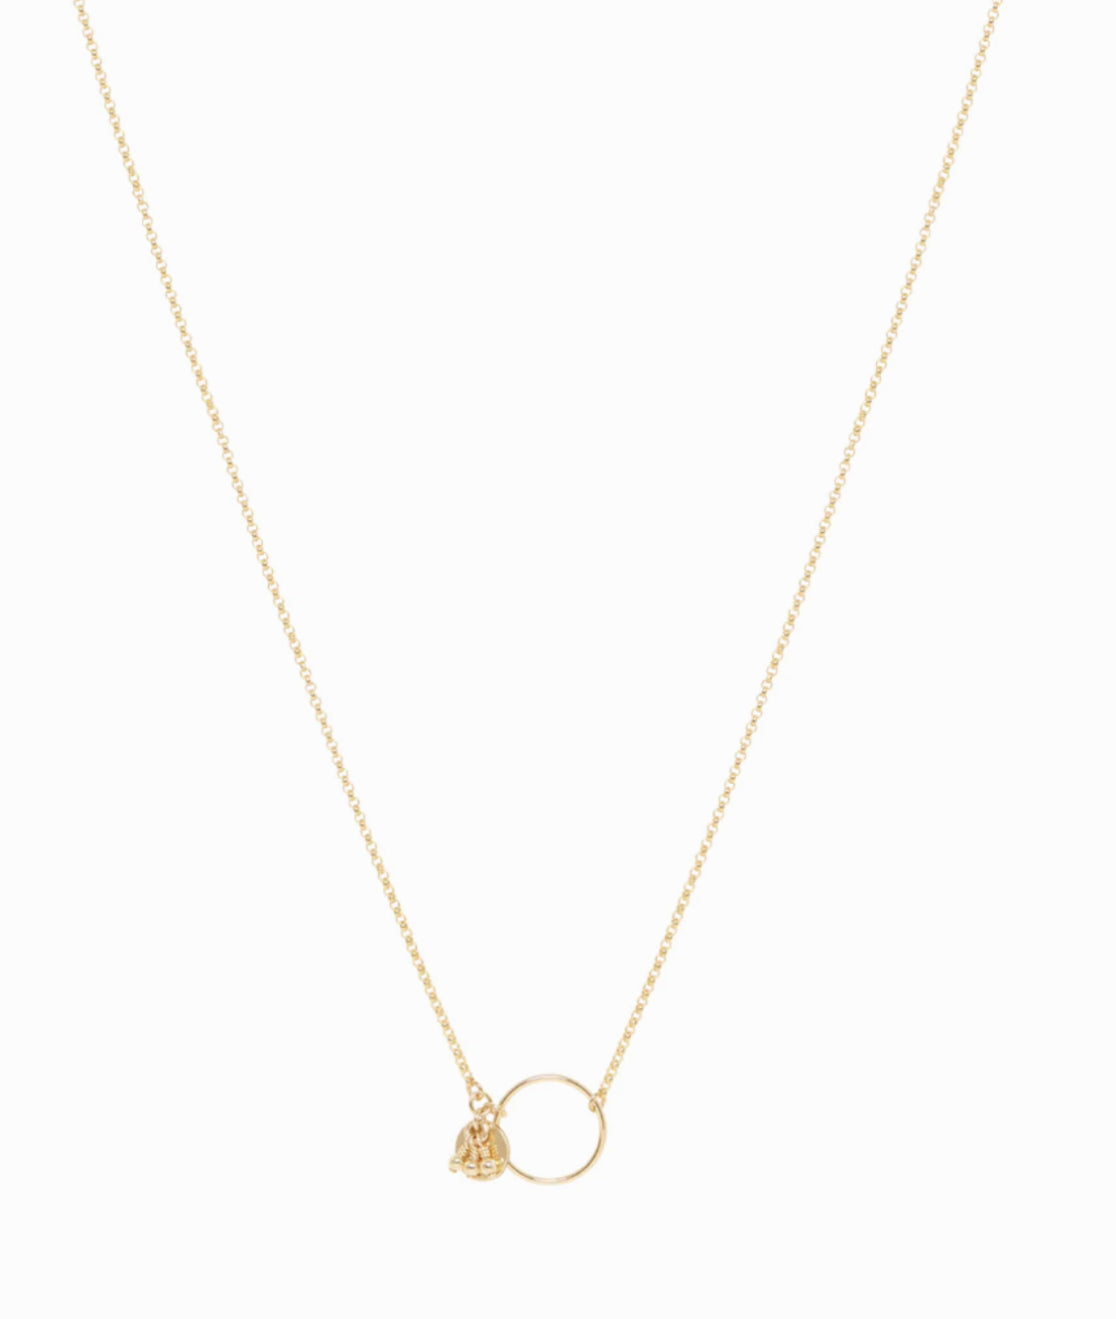 Pia Freshwater Necklace 14K GOLD FILLED